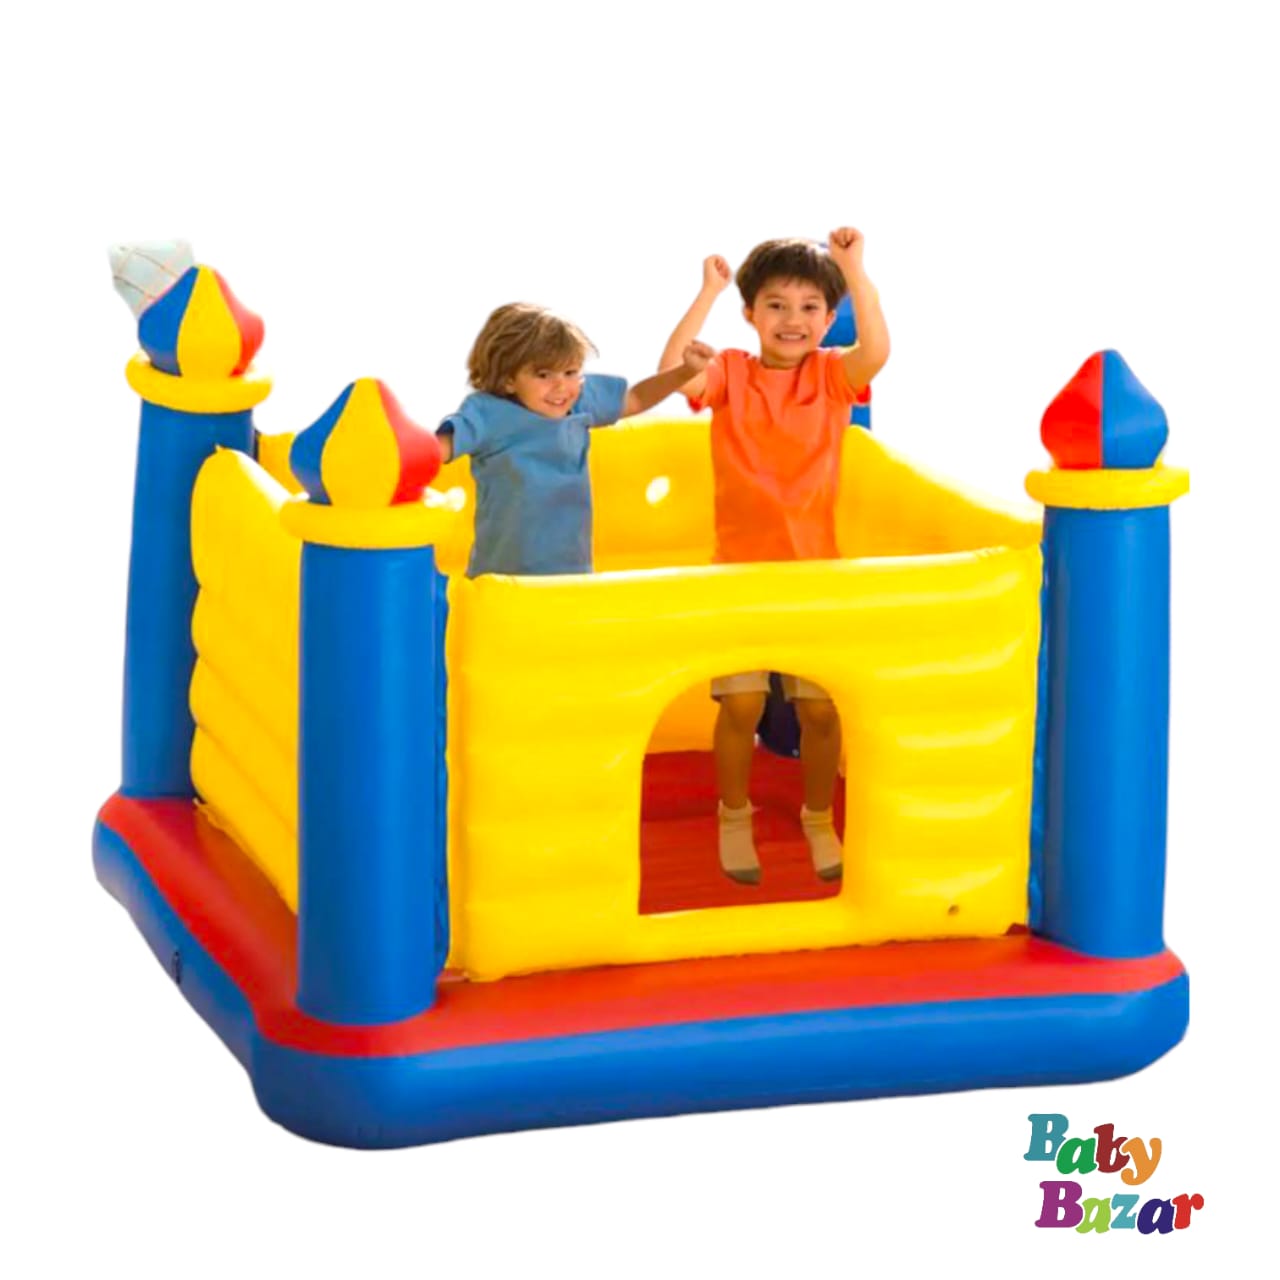 Intex - Jumping Castle Inflatable Bouncer (Complete Deal)